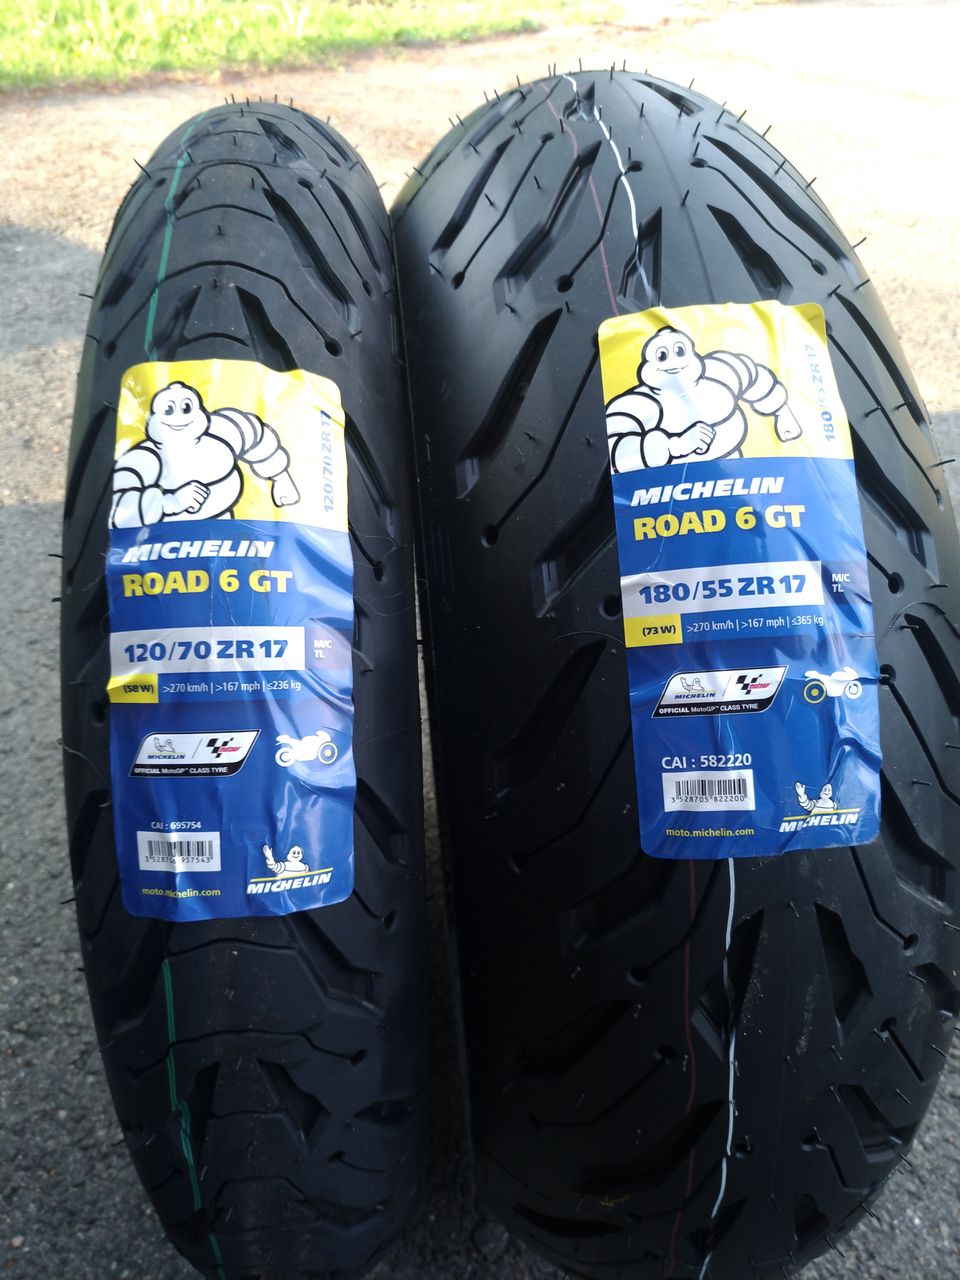 Michelin Road 6GT takarengas